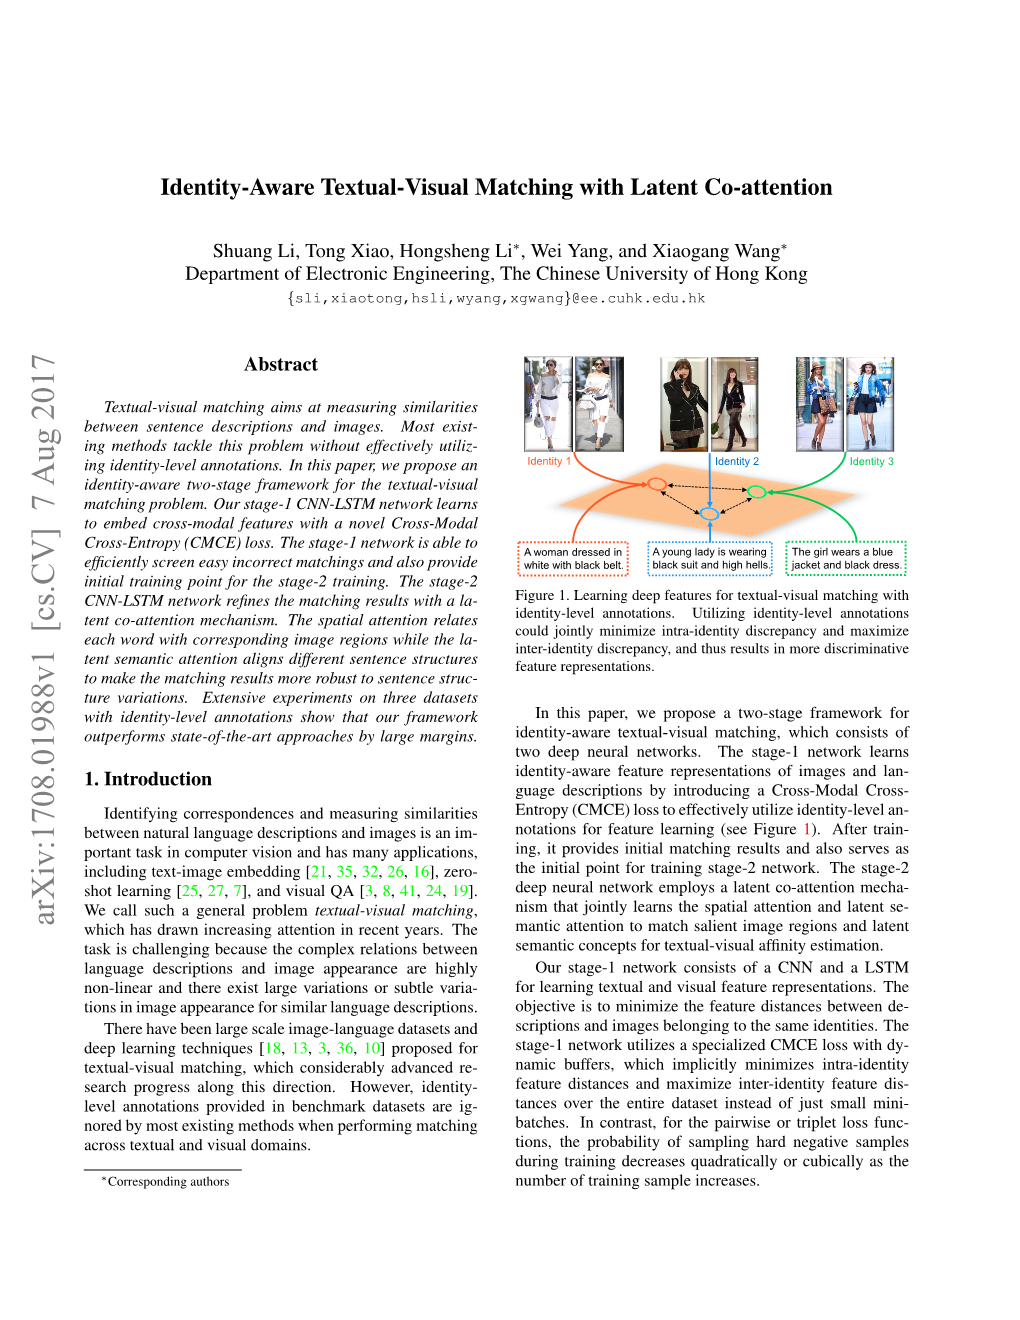 Identity-Aware Textual-Visual Matching with Latent Co-Attention